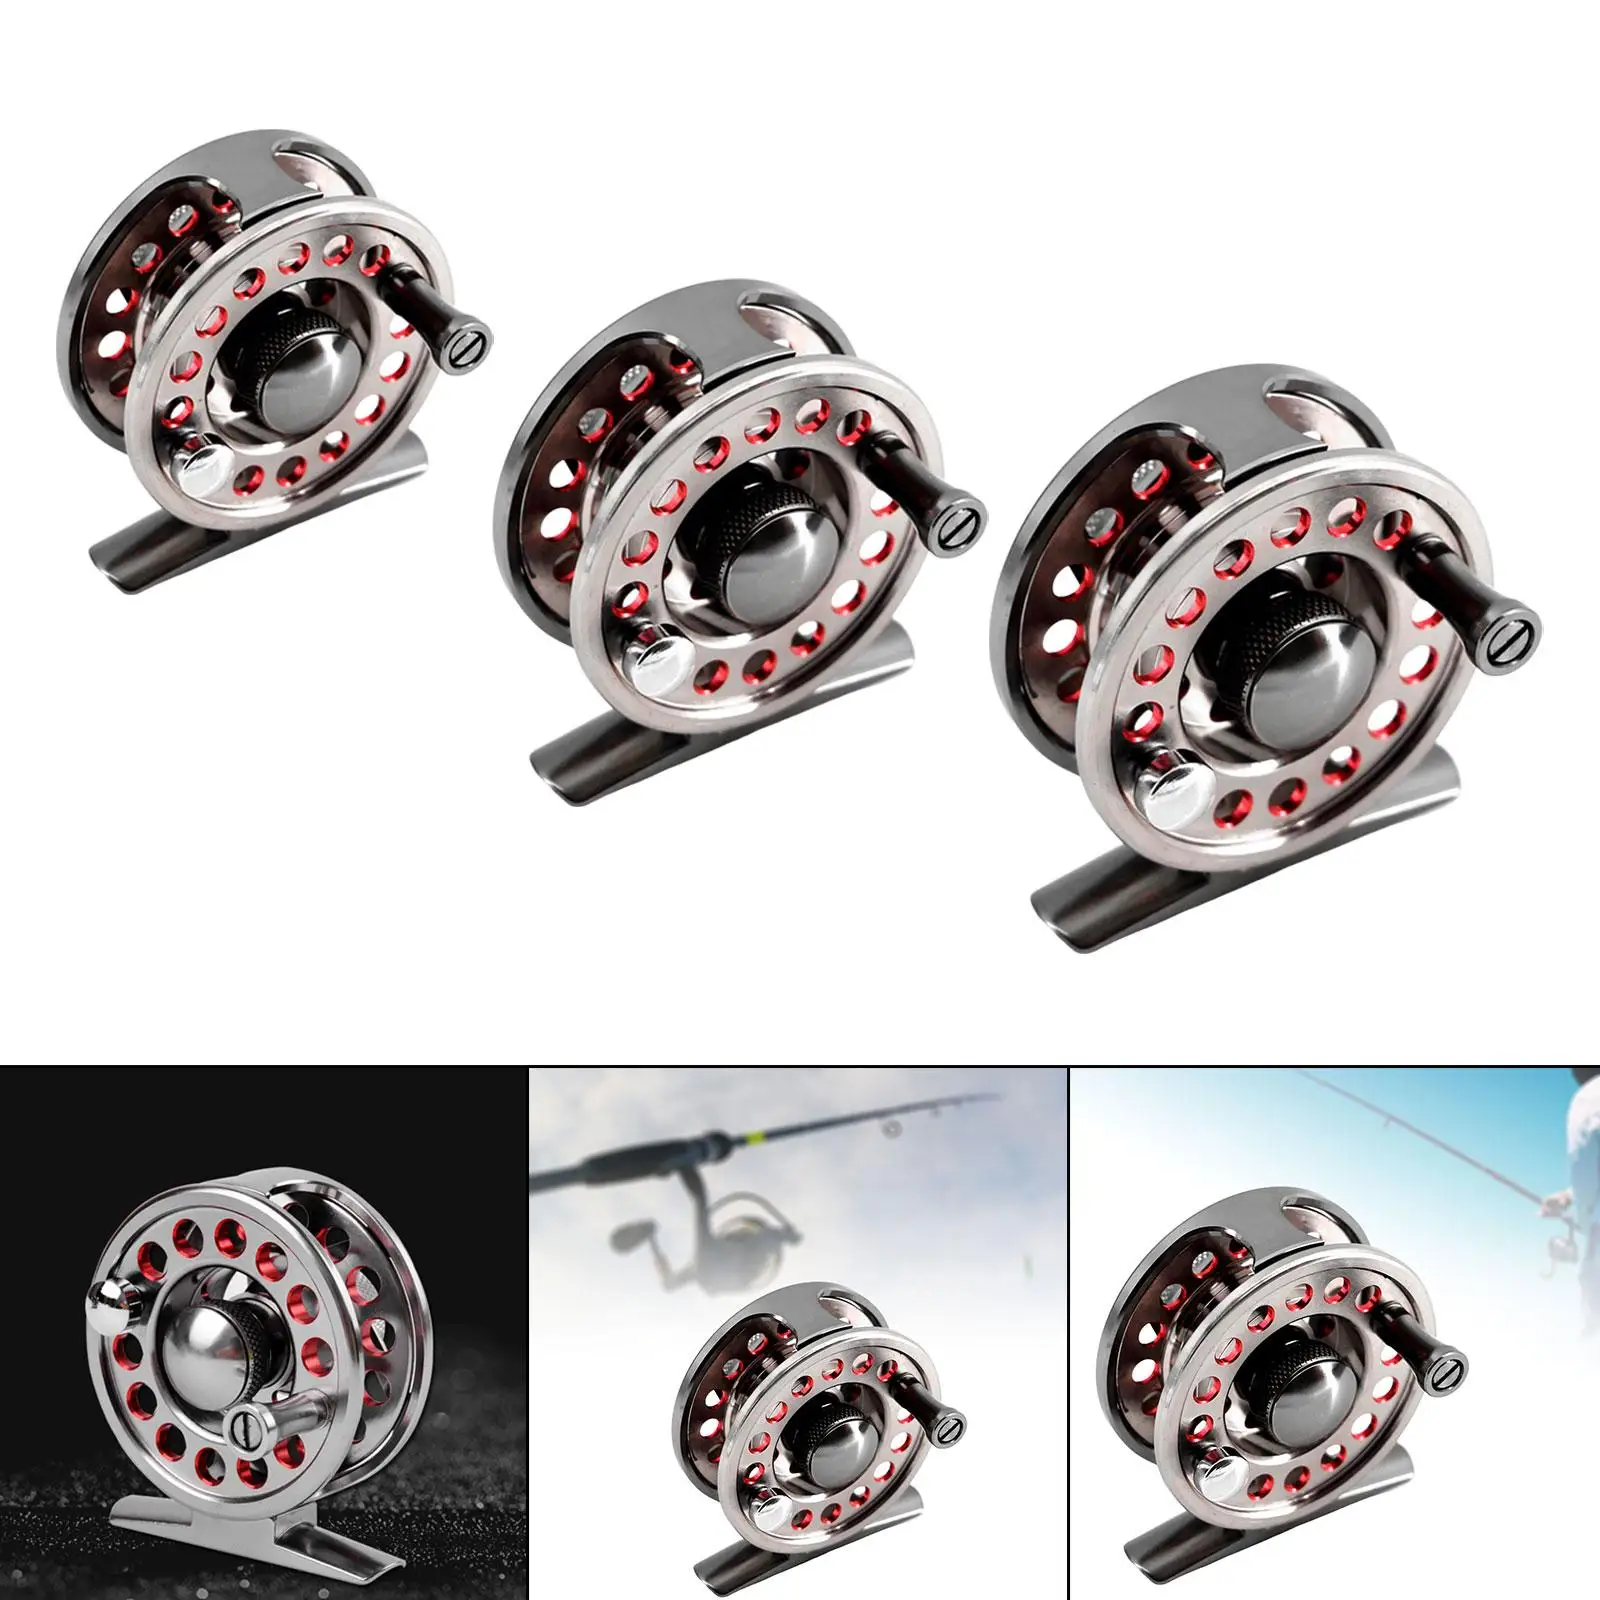 Ice Decomposition Fishing Reels Spool Center Braking System L/R Hand for Freshwater Saltwater Tools Fish Tackle Gear